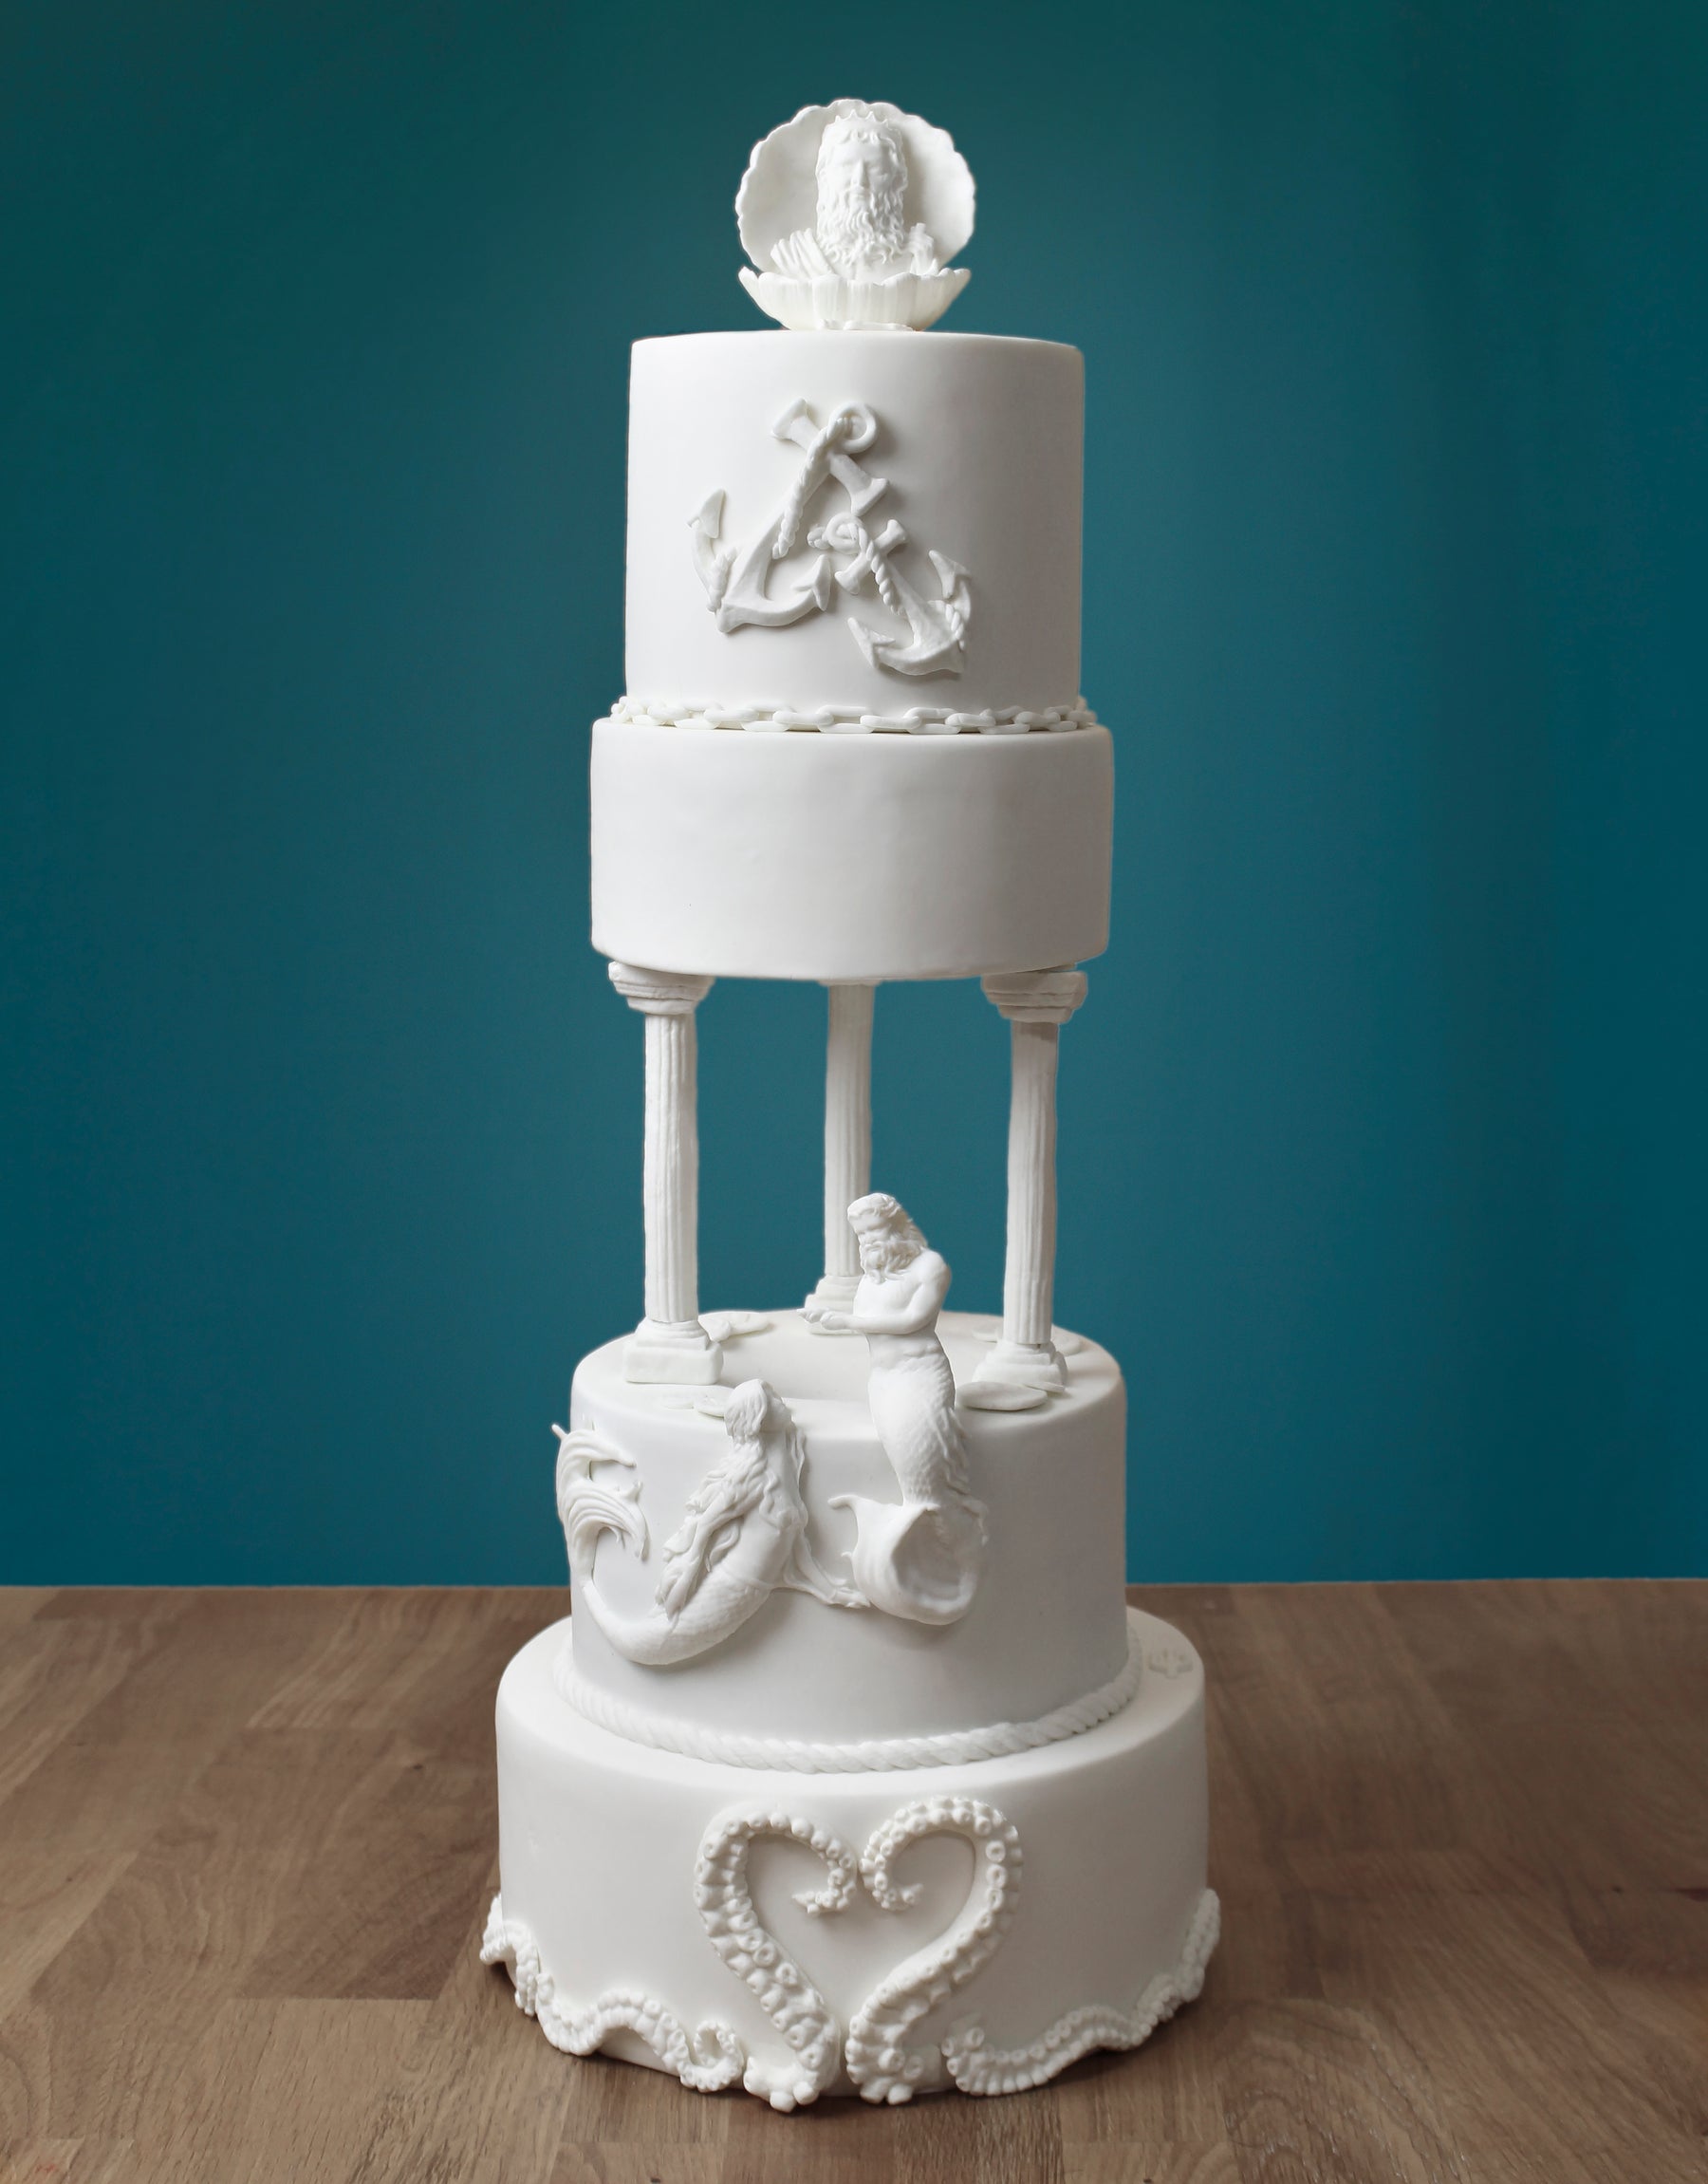 How to Make Column Cake Supports for Tiered Cakes